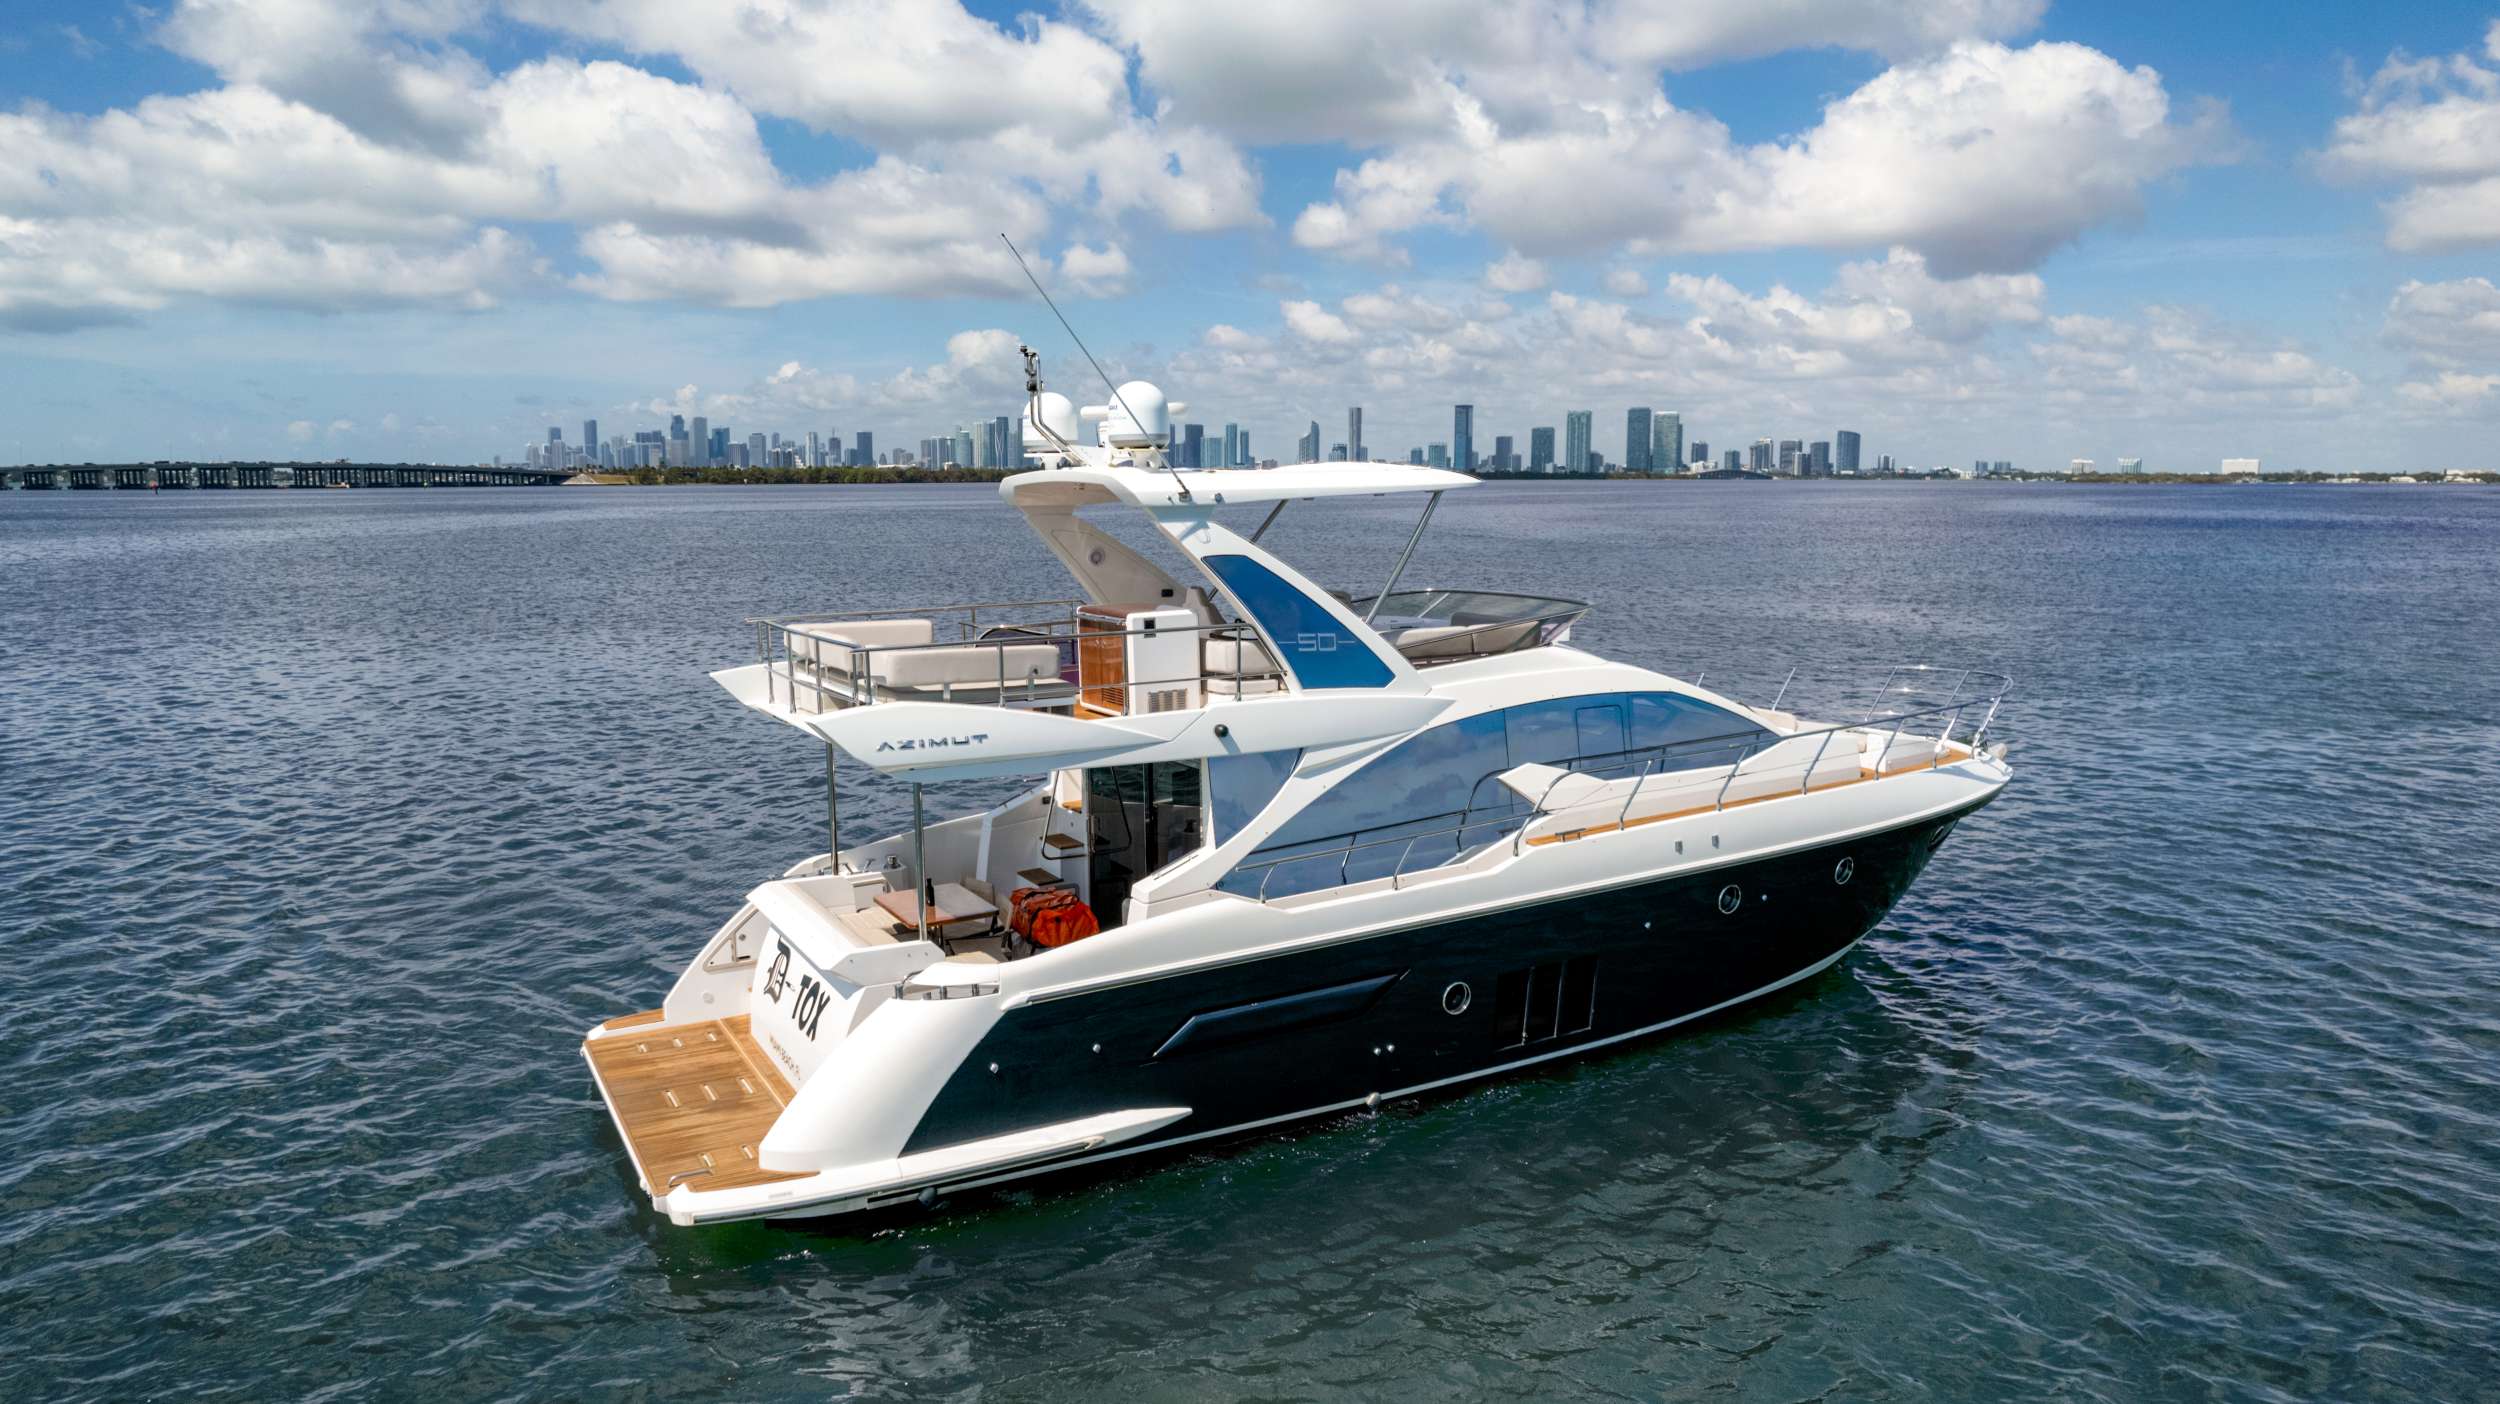 D-Tox - Yacht Charter USA & Boat hire in Florida 1